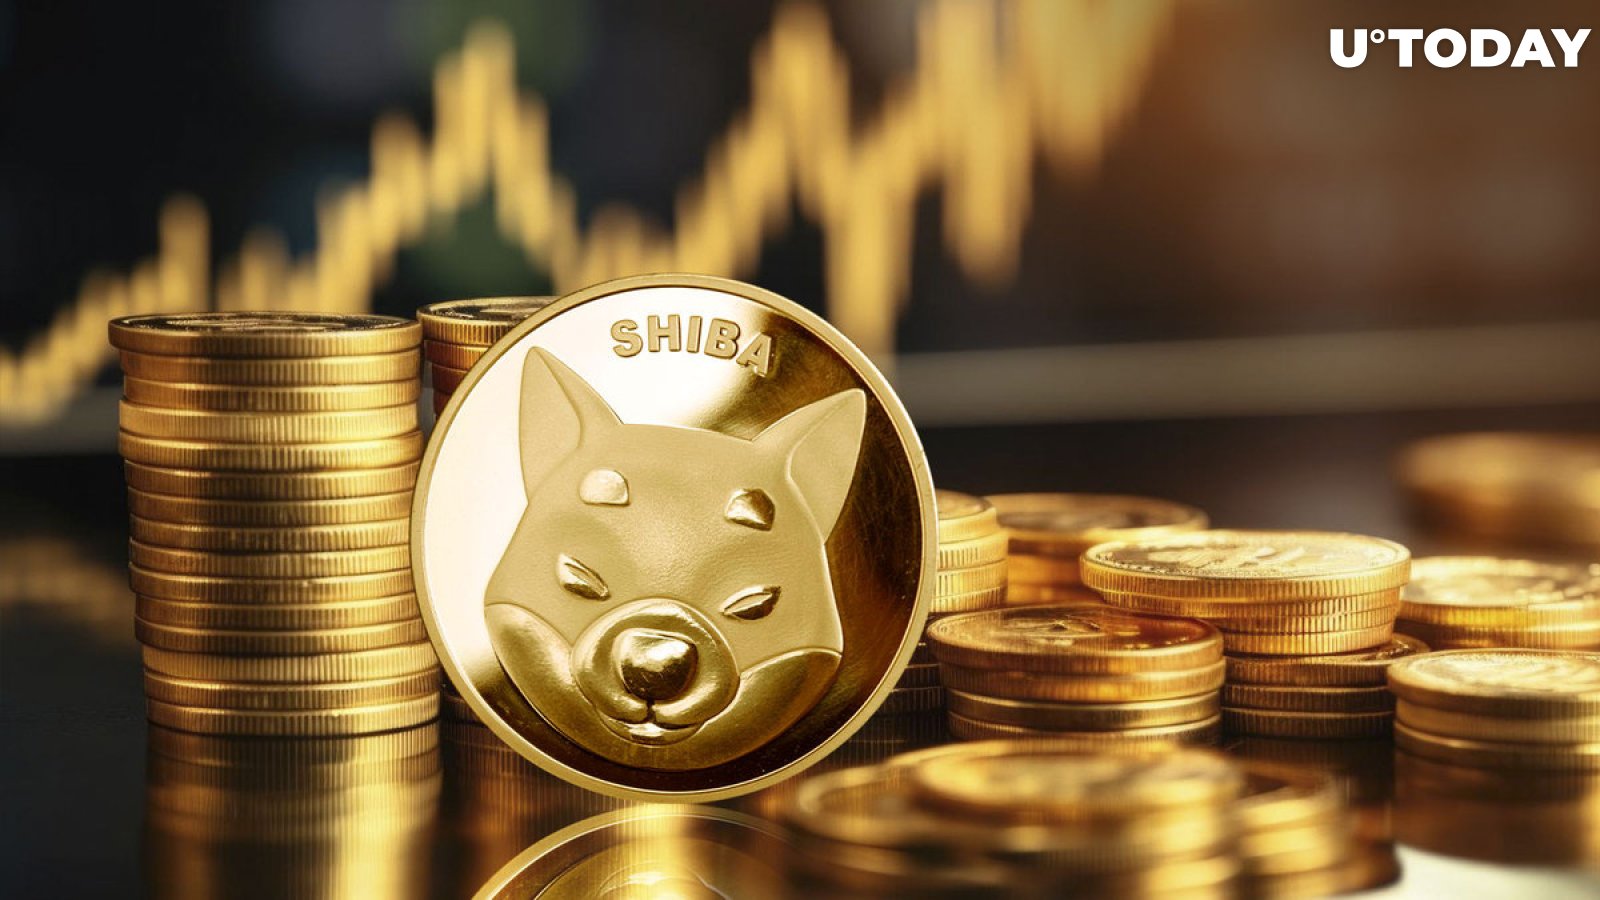 1.356 Trillion SHIB Suddenly Bought by 9 Wallets – What's Going On?